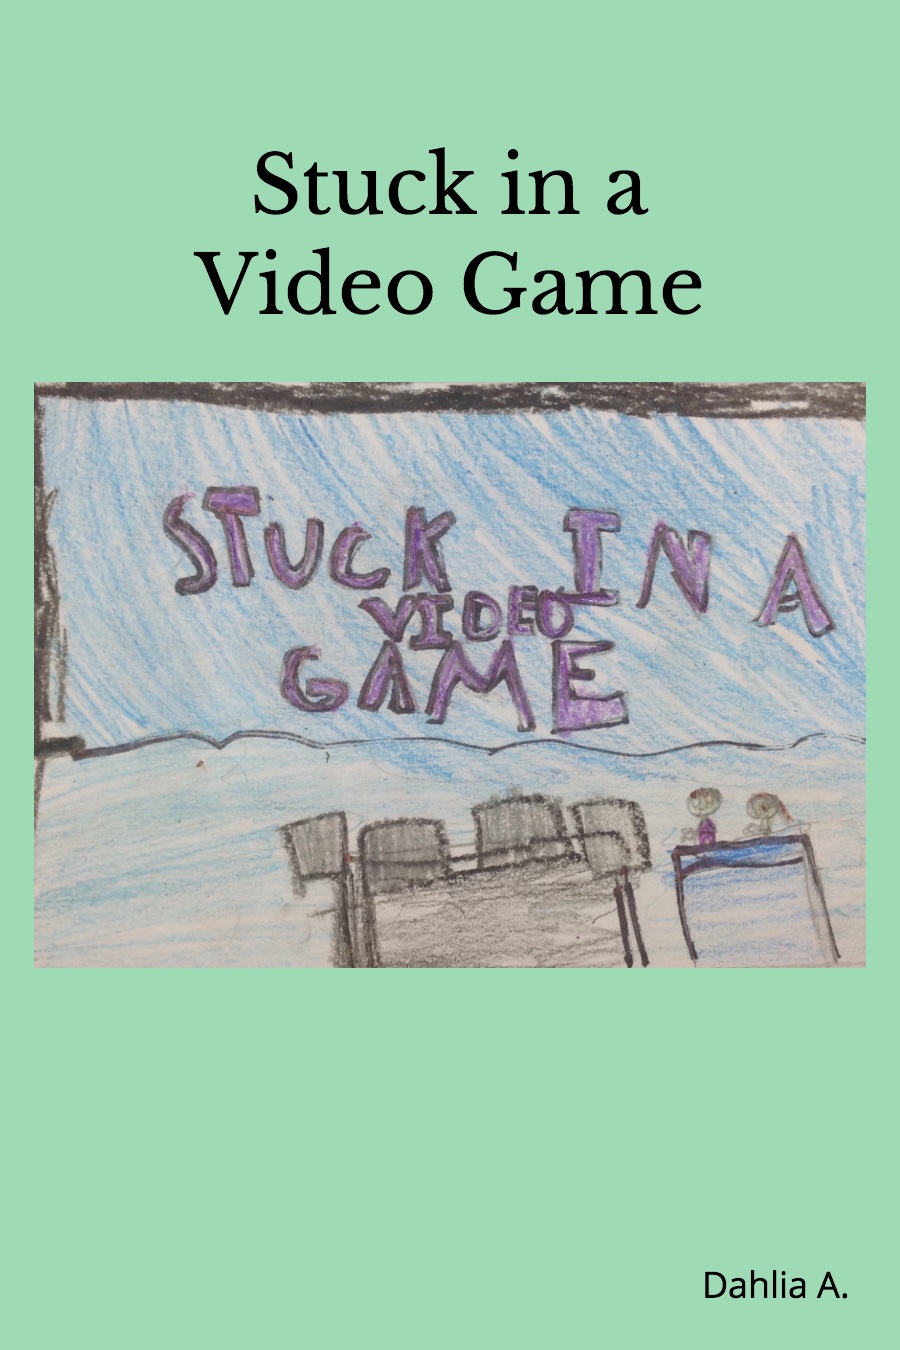 Stuck in a Video Game by Dahlia A